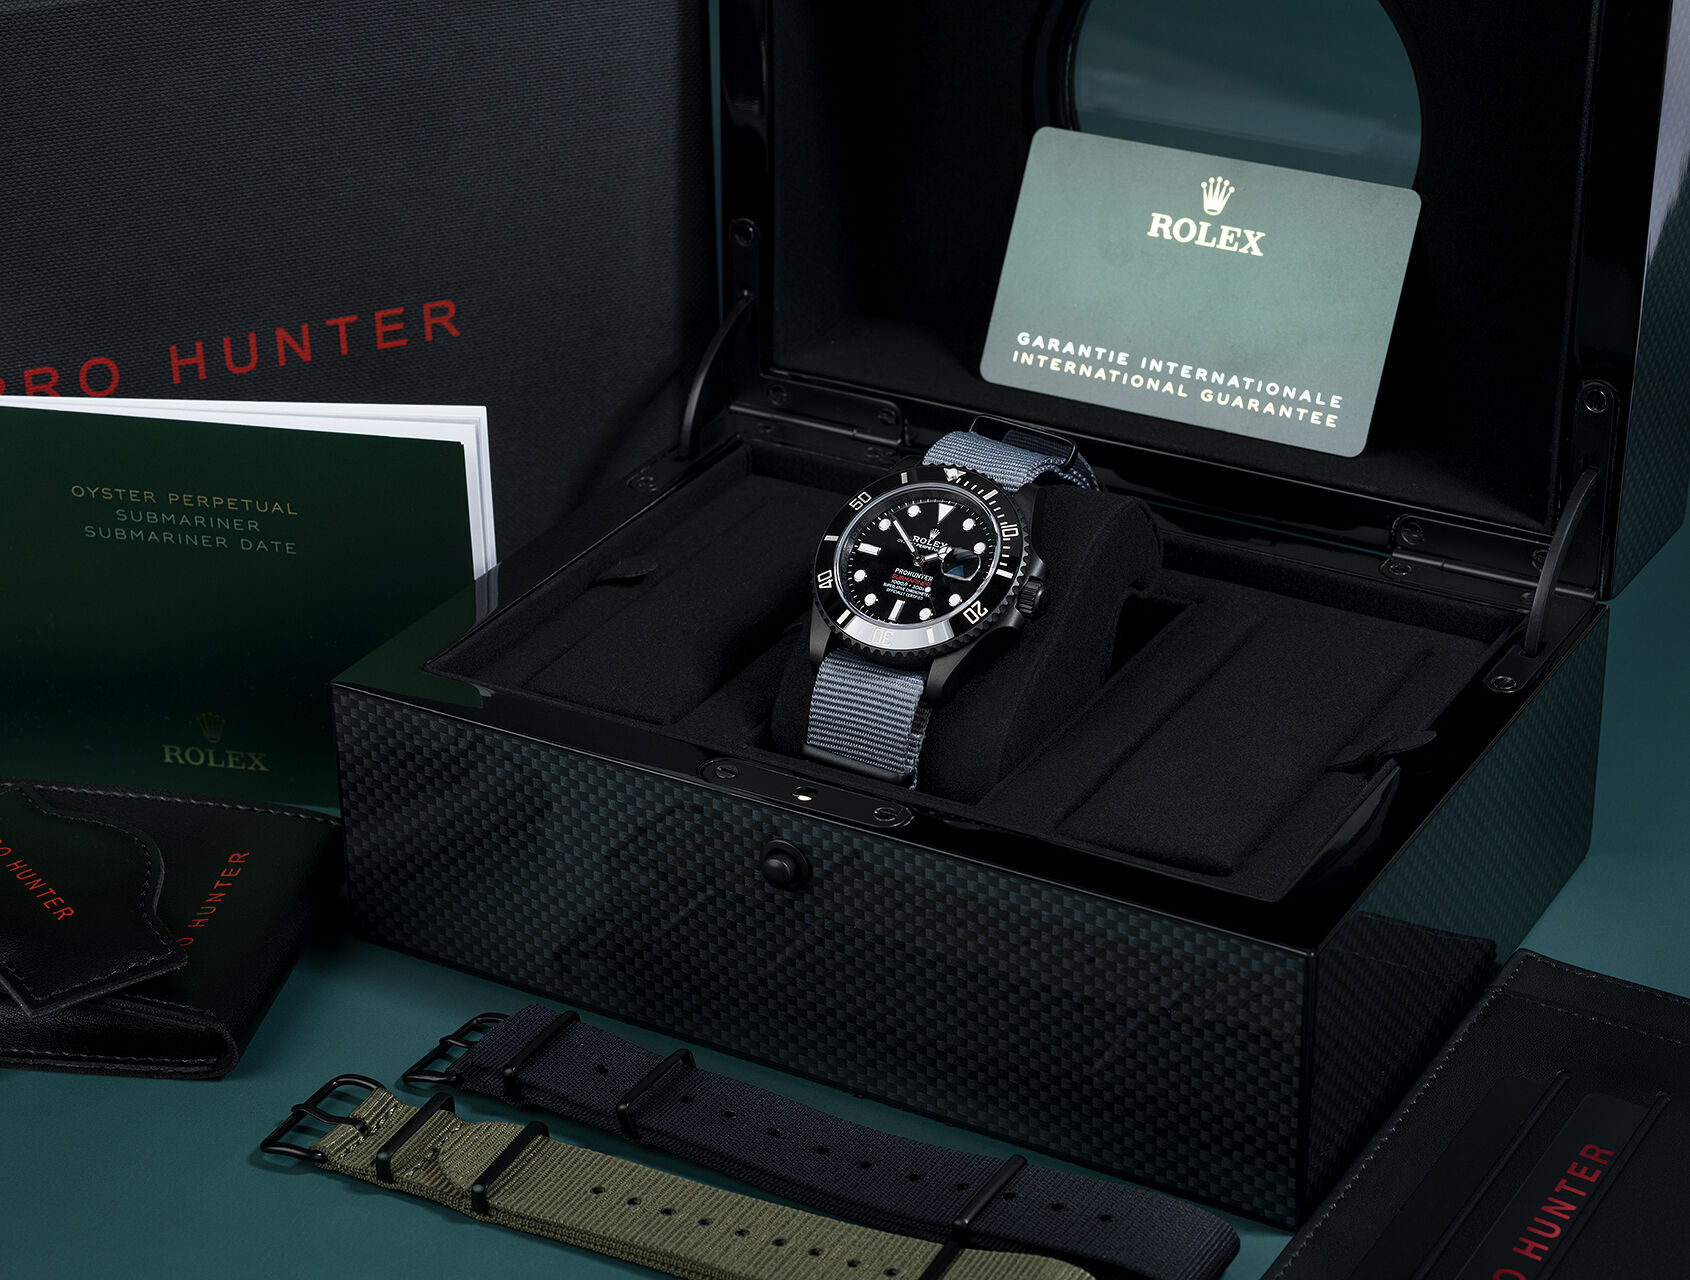 ref 126610LN | 126610LN - Limited Edition | Pro Hunter Military Stealth Submariner Date